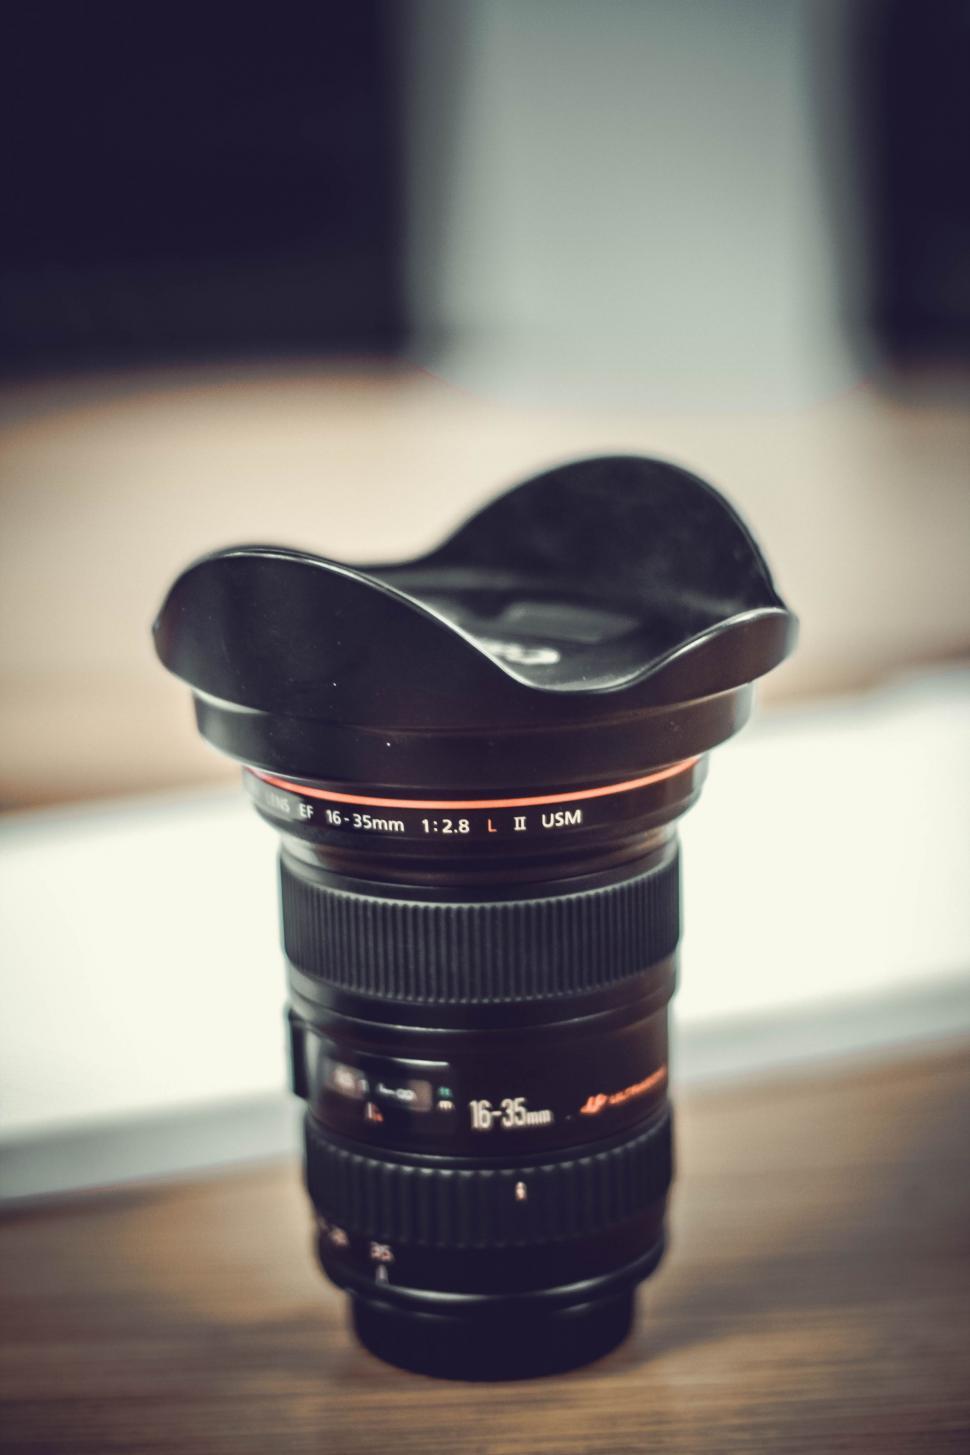 Free Image of Camera Lens on table  